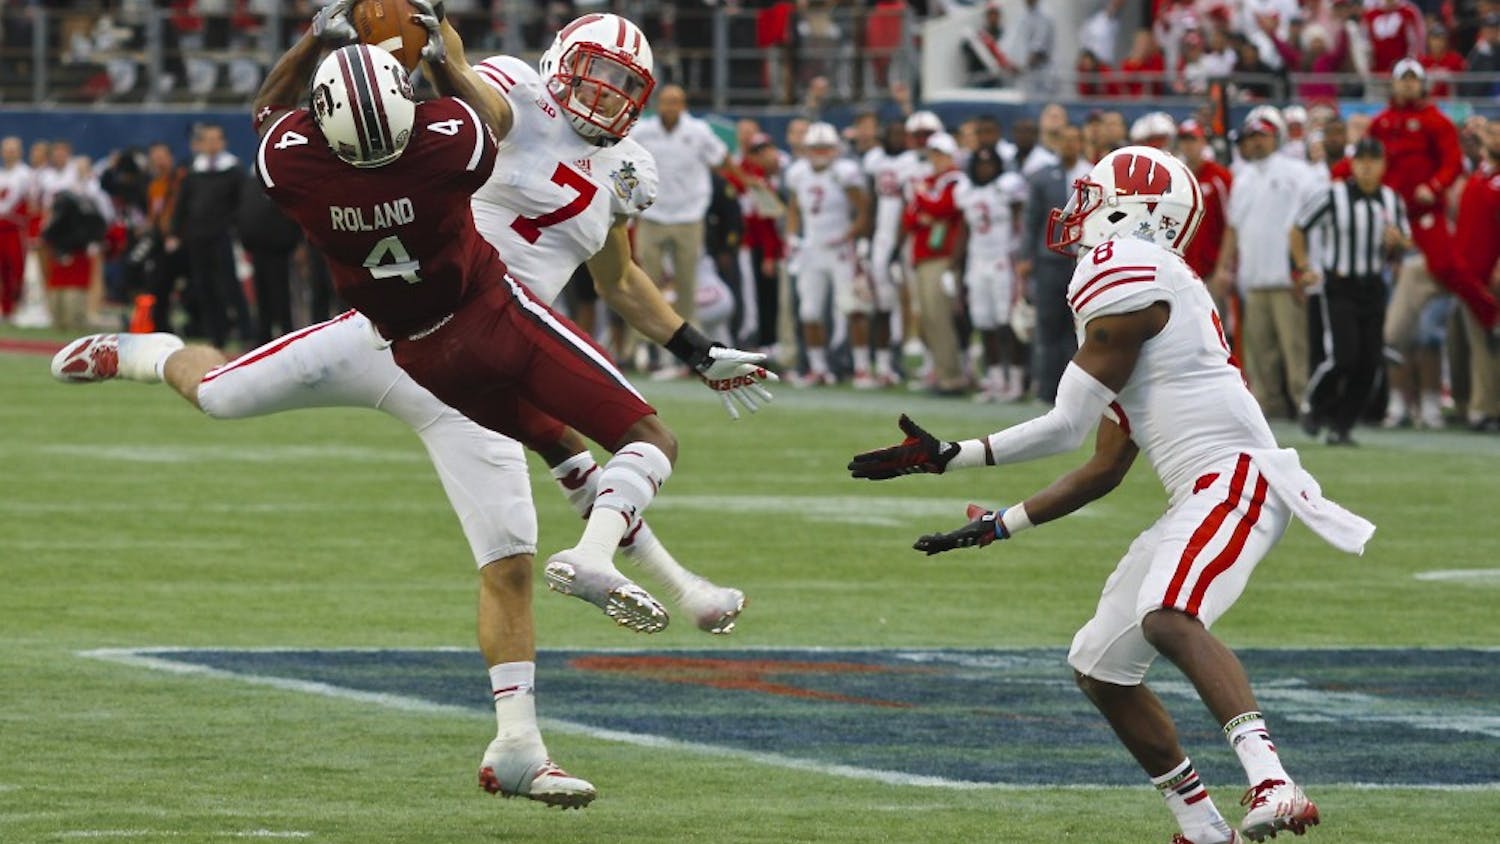 	Sophomore wide-out Shaq Roland brings down an improbable catch in traffic, one of his six grabs in South Carolina&#8217;s 34-24 win over Wisconsin in the 2014 Capital One Bowl.